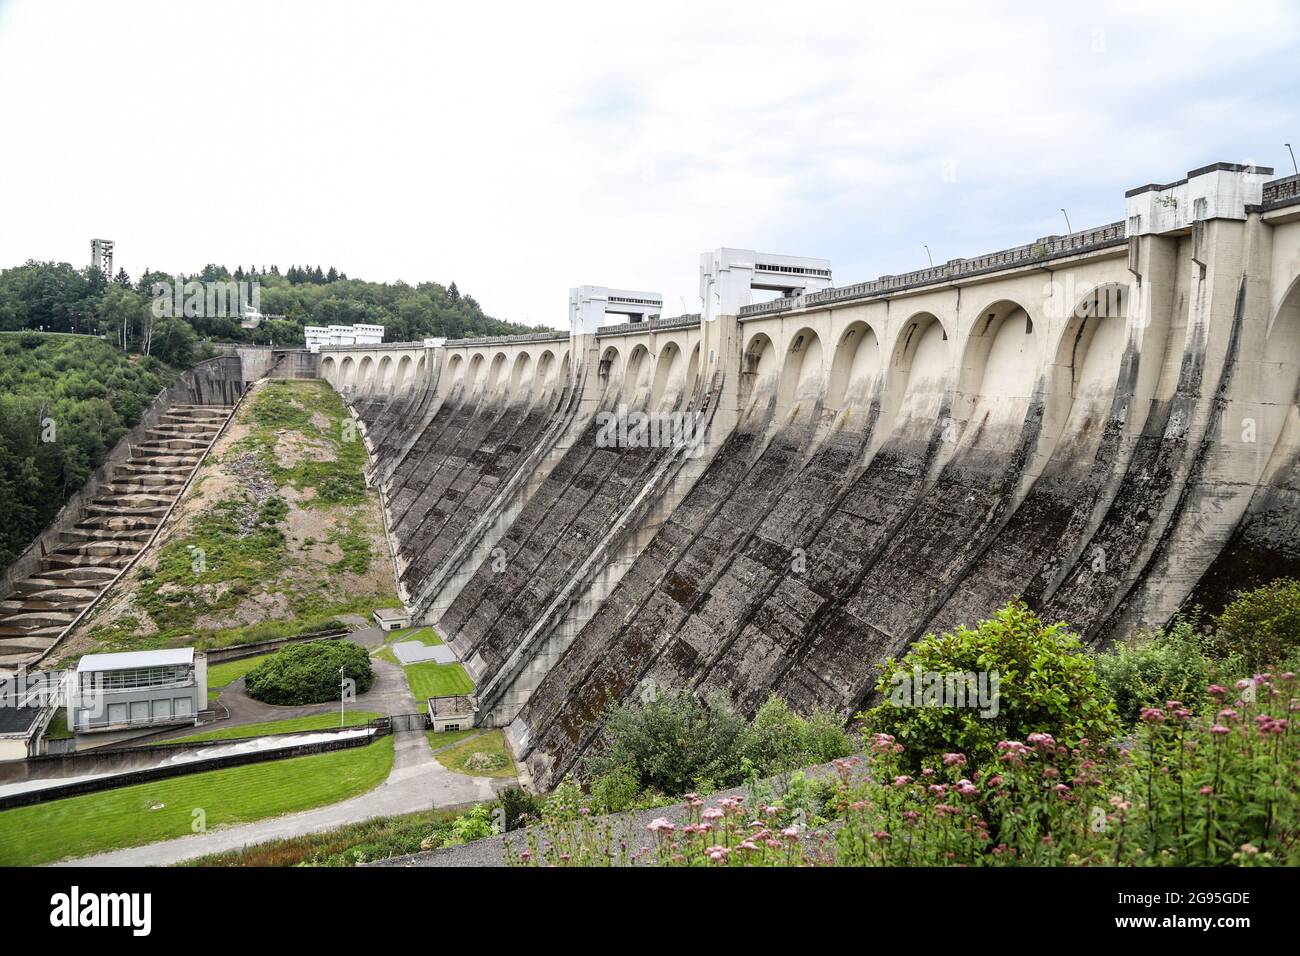 In illustration the dam of the Vesdre (Eupen), contents of the dam 25  million m3, height 63 meters, length 410 meters, the area of the lake is  136 hectares and construction began